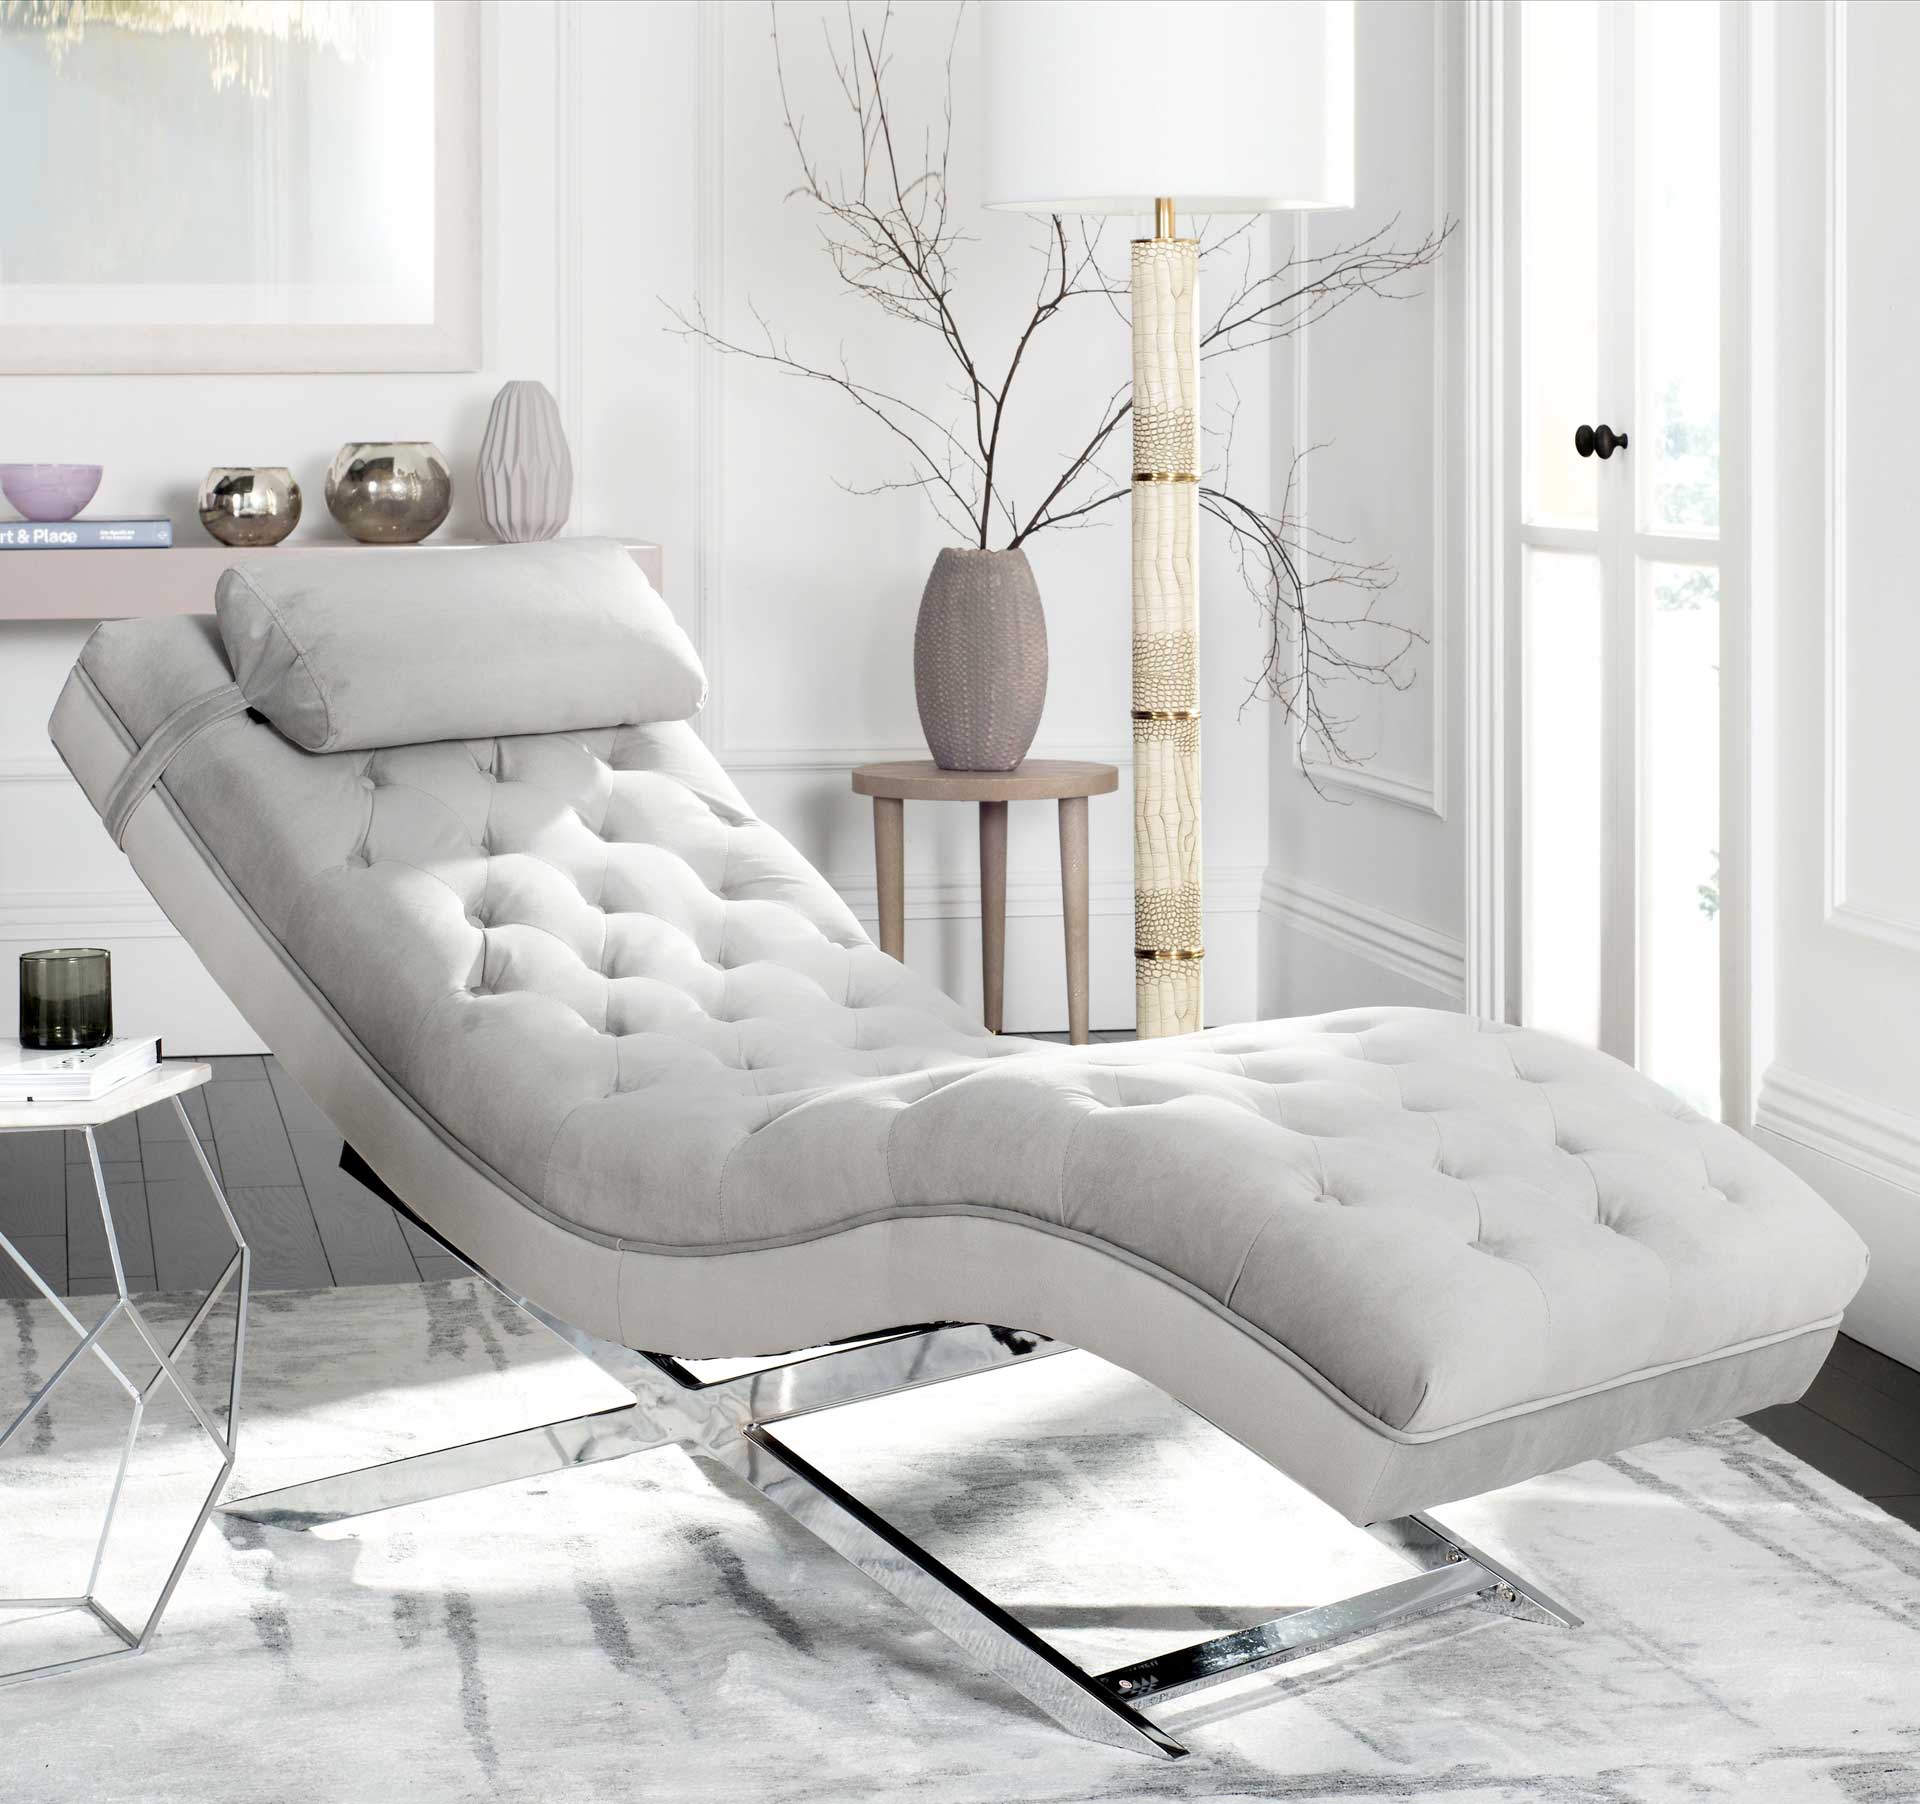 Morph Chaise With Headrest Pillow Gray